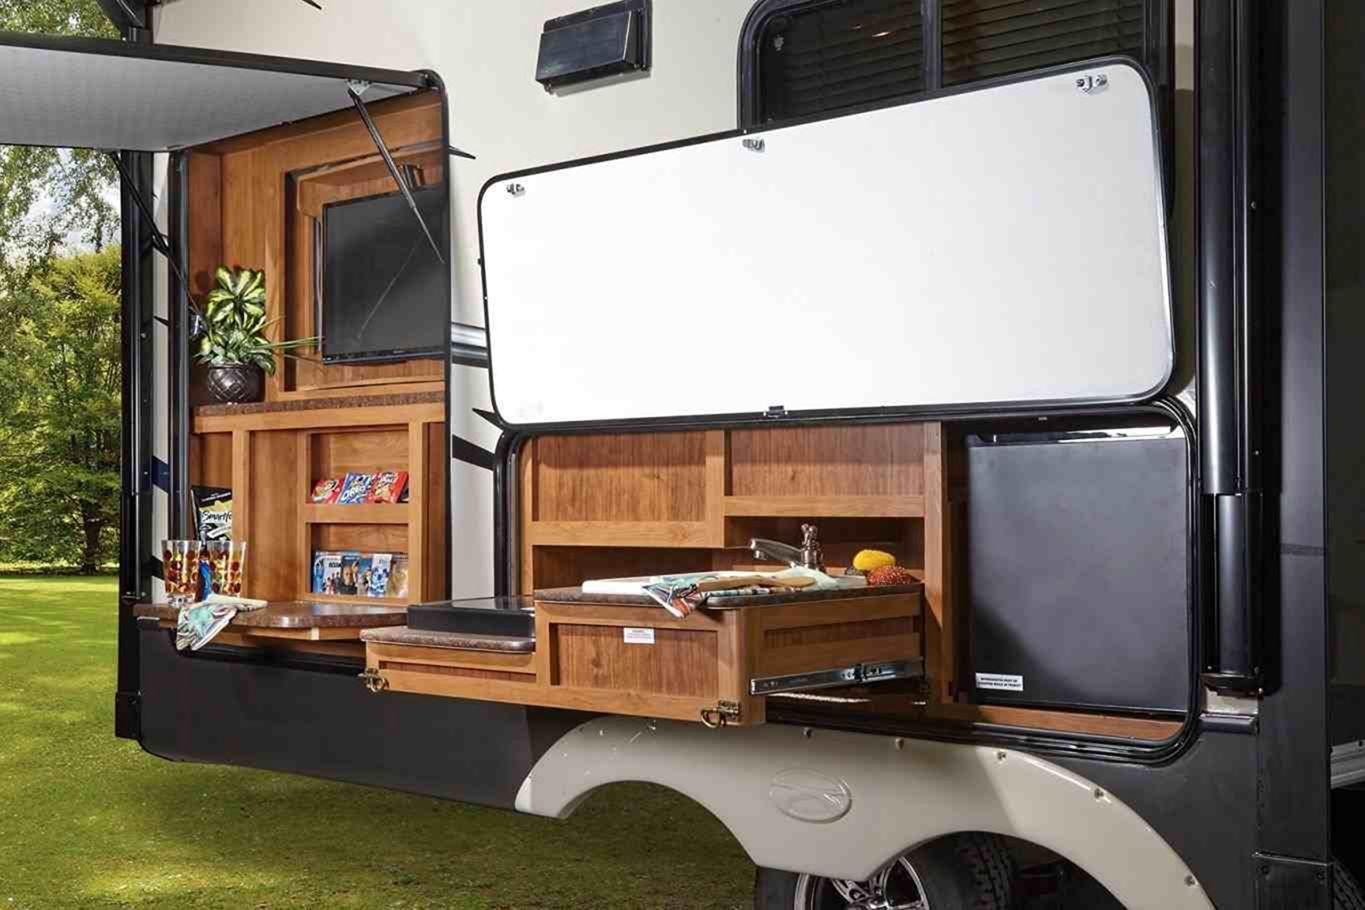 Rv Outdoor Kitchen Ideas
 Enjoyable Cooking When Holiday with Outdoor RV Kitchen